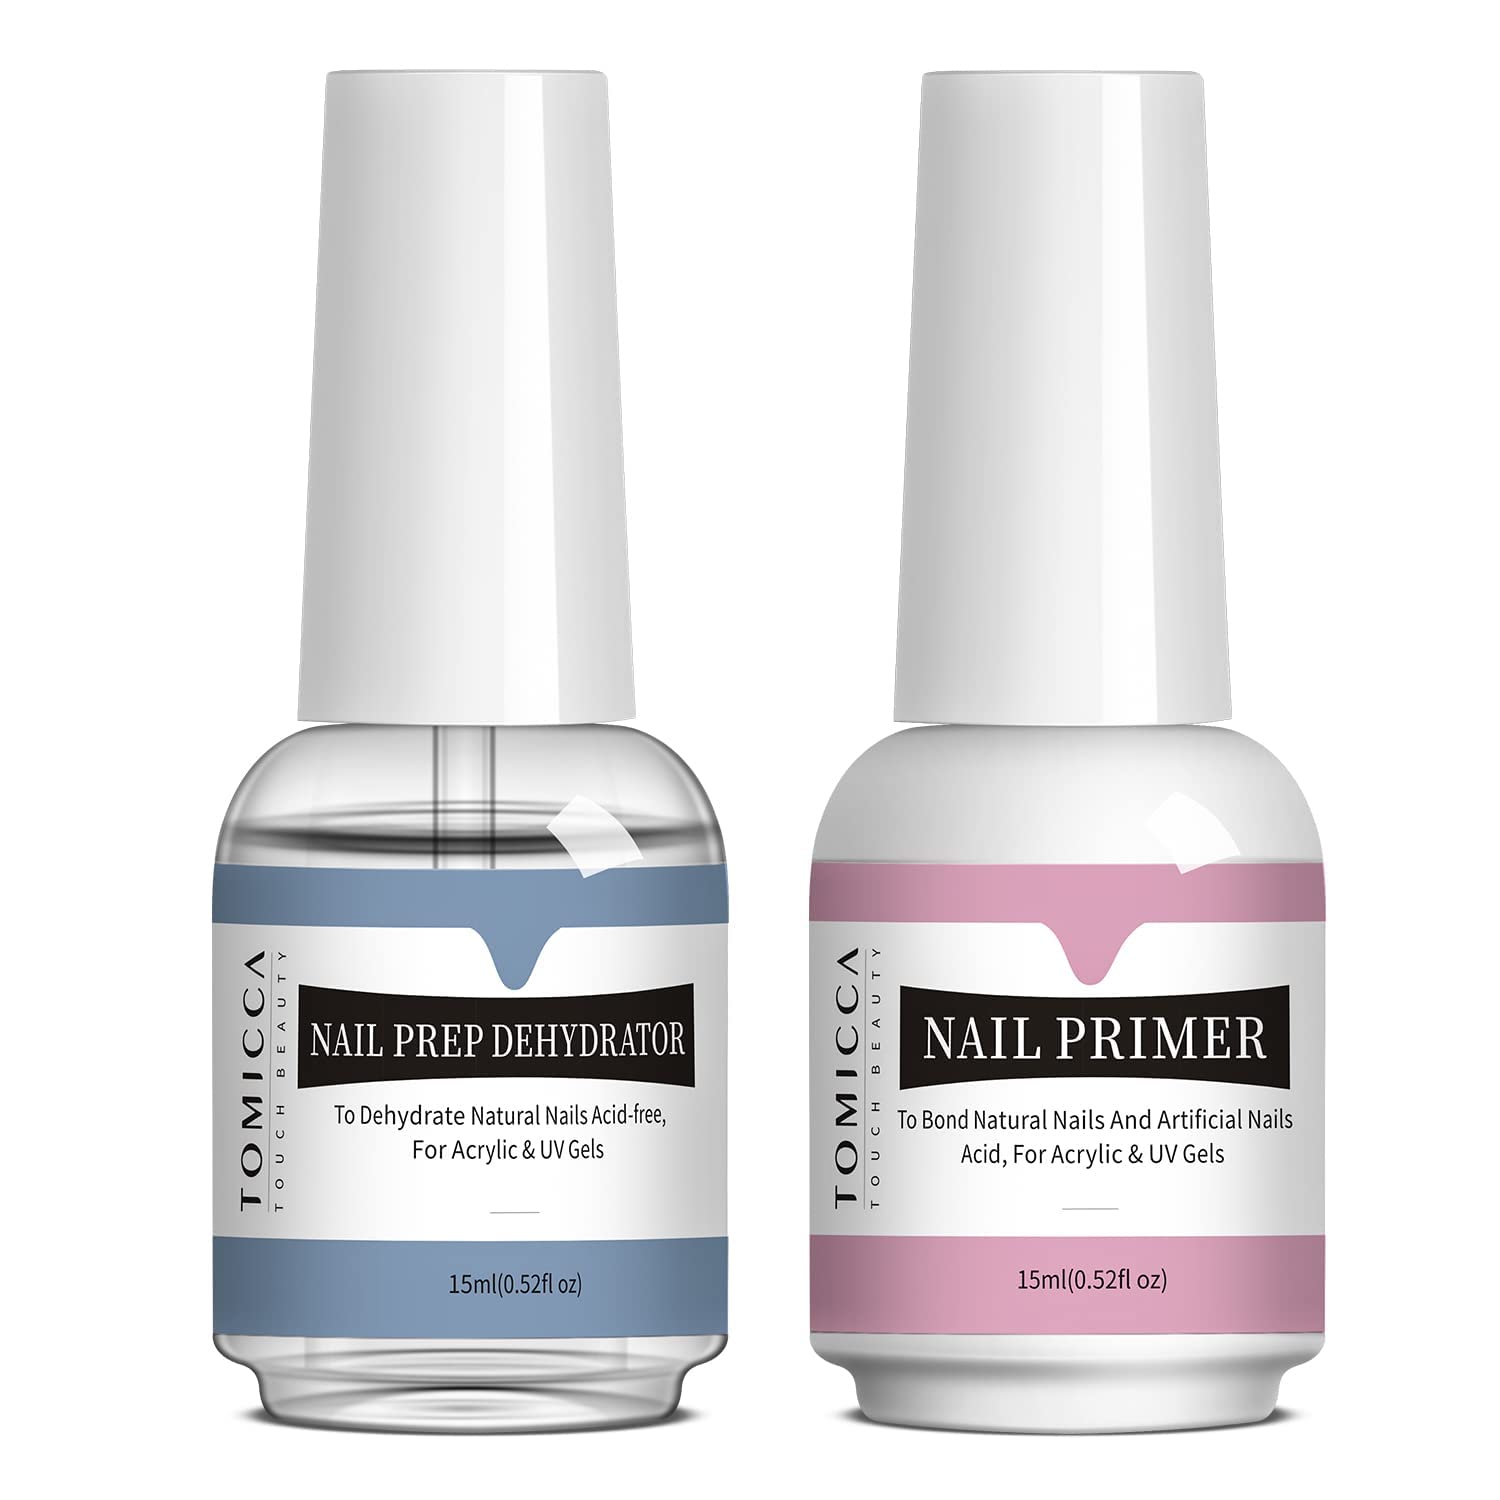 What is the difference? Nail Bonders, Primers & Dehydrators | DeEnterprises  Inc.